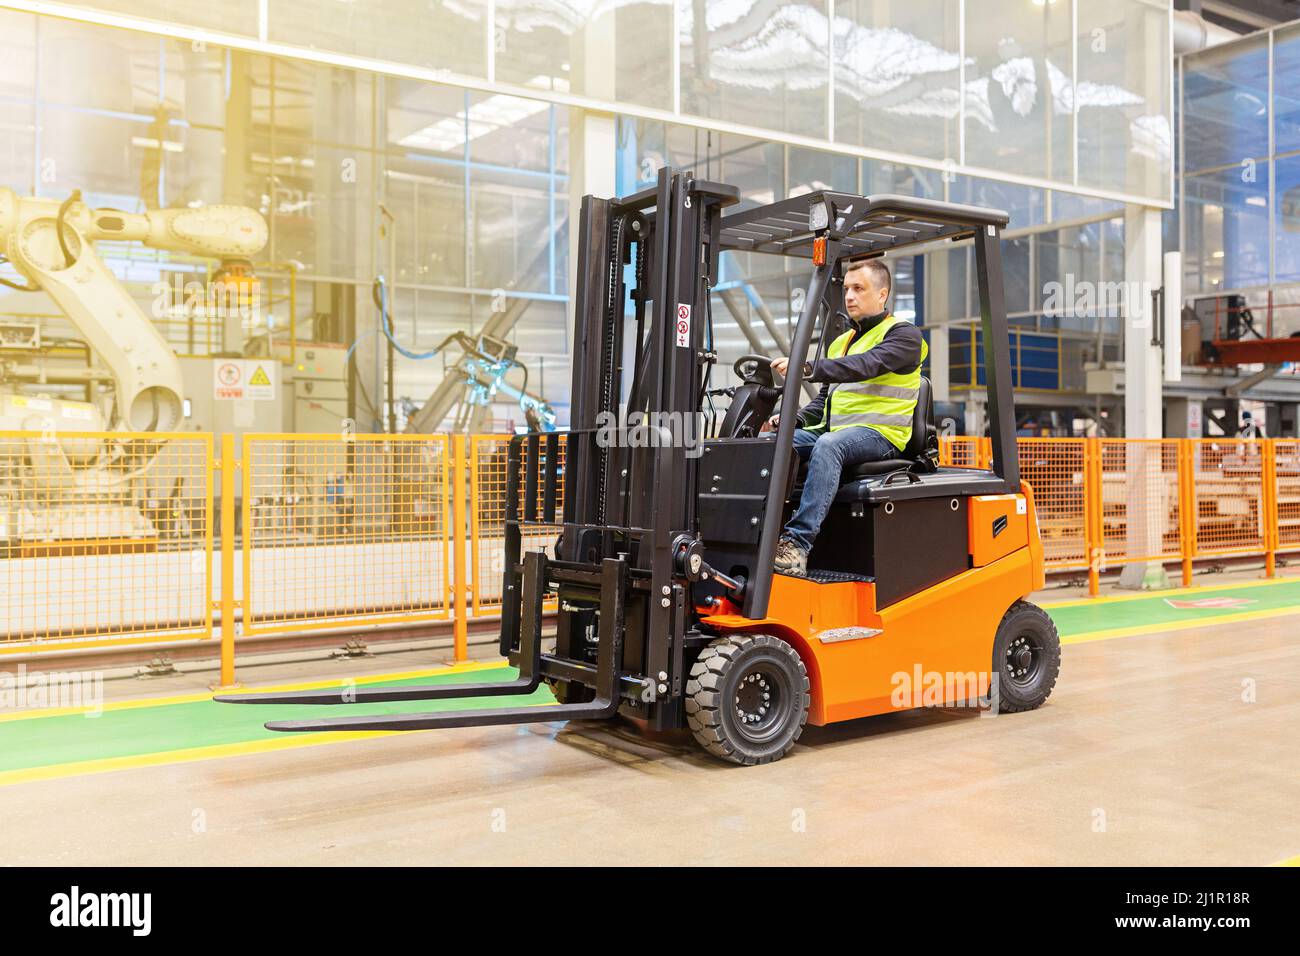 Storehouse employee in uniform working on forklift in modern automatic warehouse. Boxes are on the shelves of the warehouse. Warehousing, machinery Stock Photo